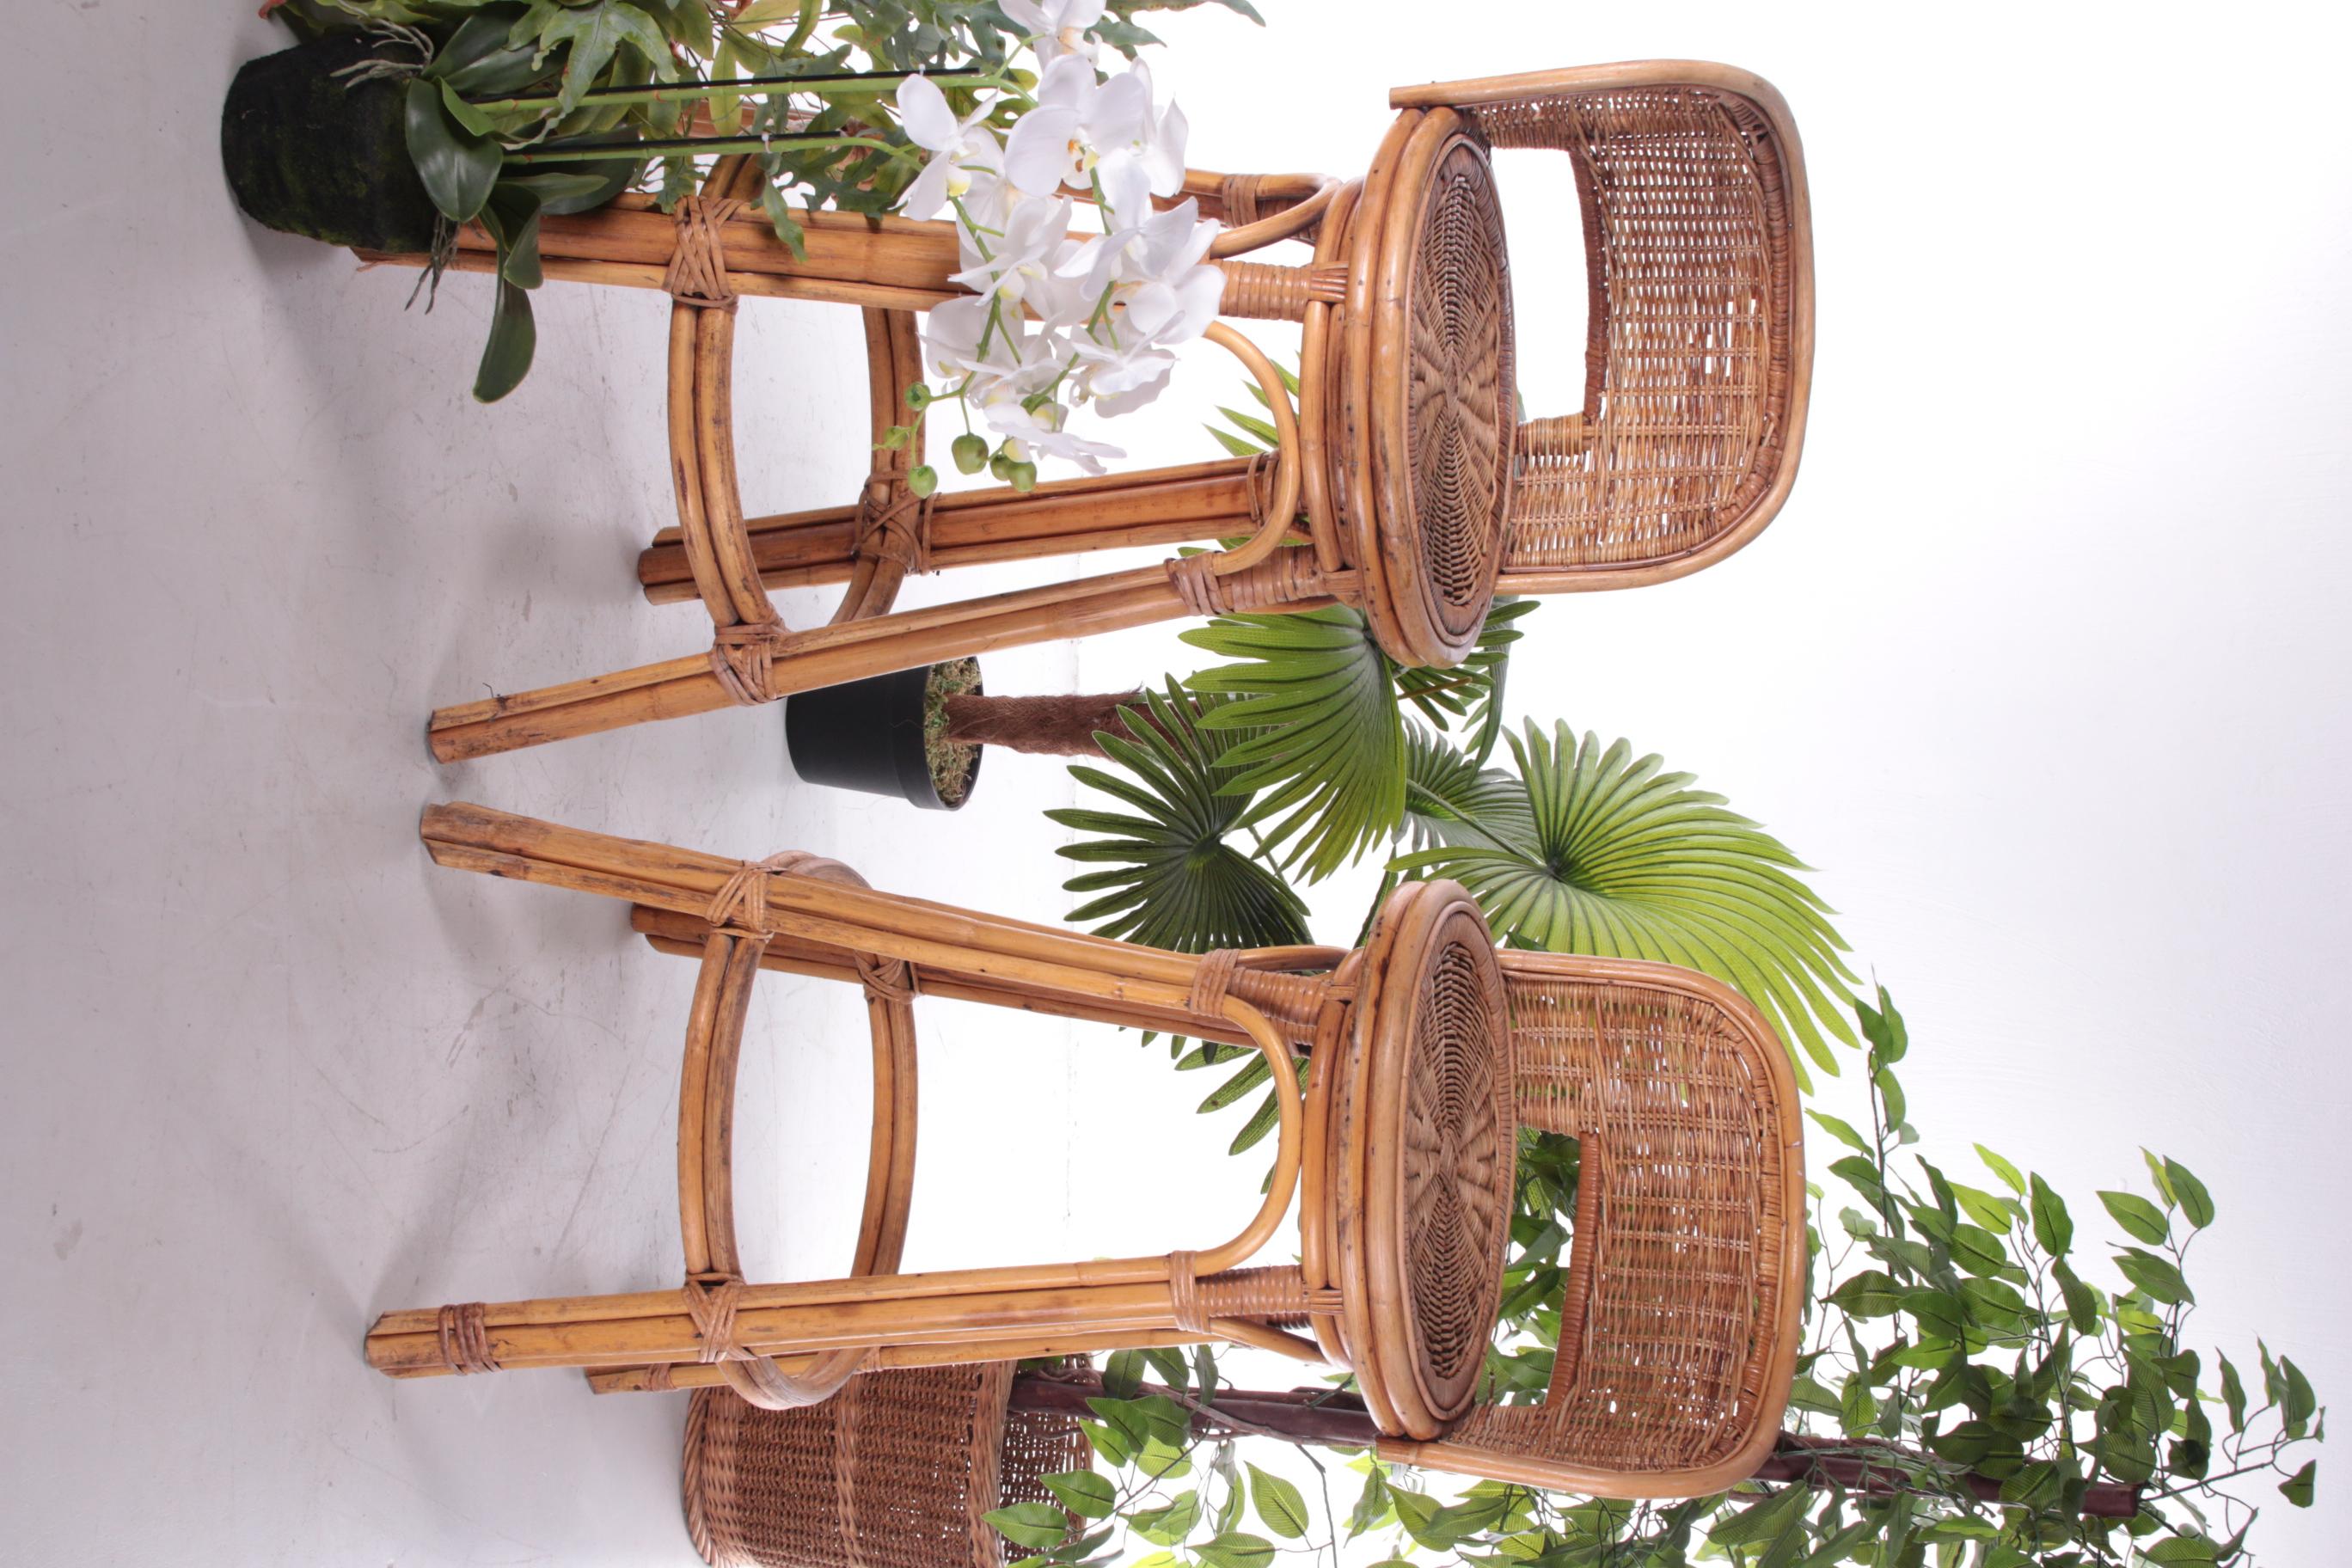 This nice set of two rattan bar stools with a rotating seat have the typical bohemian look. The set comes from the United States and was produced around the 1950s.

The sturdy bamboo frame still looks good for its age and can still last for ages.